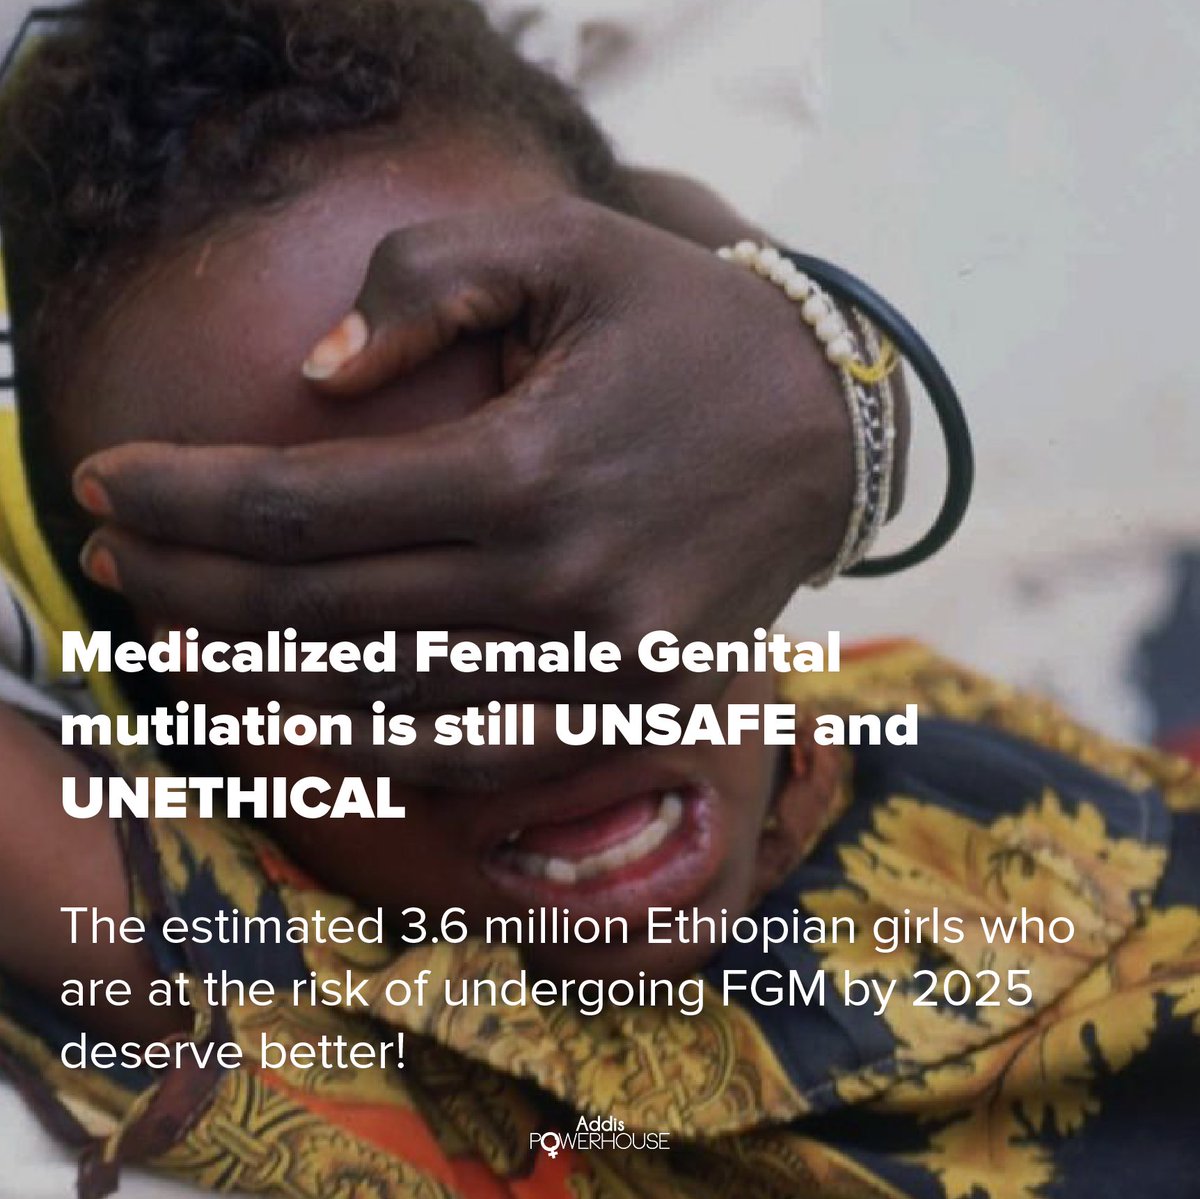 What is the consequences of the Supreme Council of Islamic Affairs in Ethiopia approving medicalized FGM? Thread: